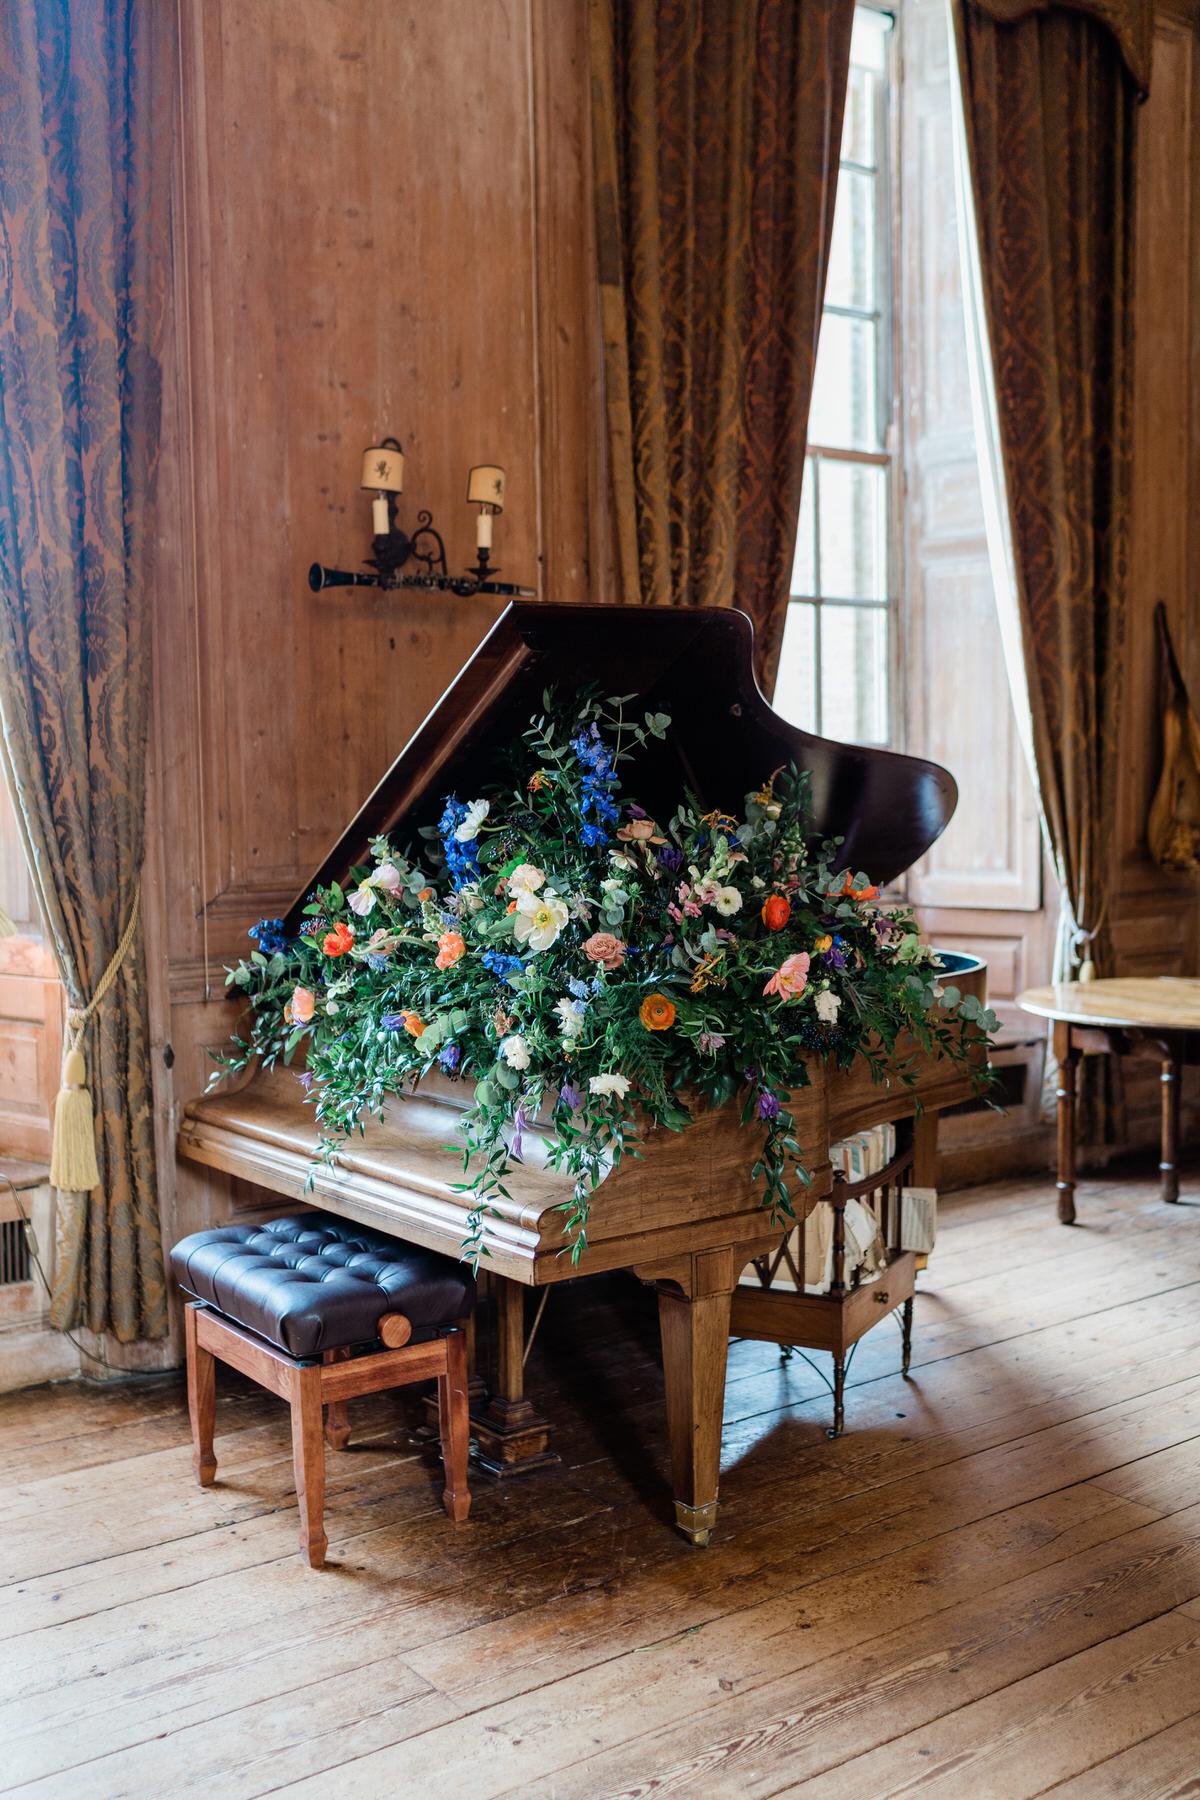 The grand piano at Glemham Hall wedding venue decorated with flowers.